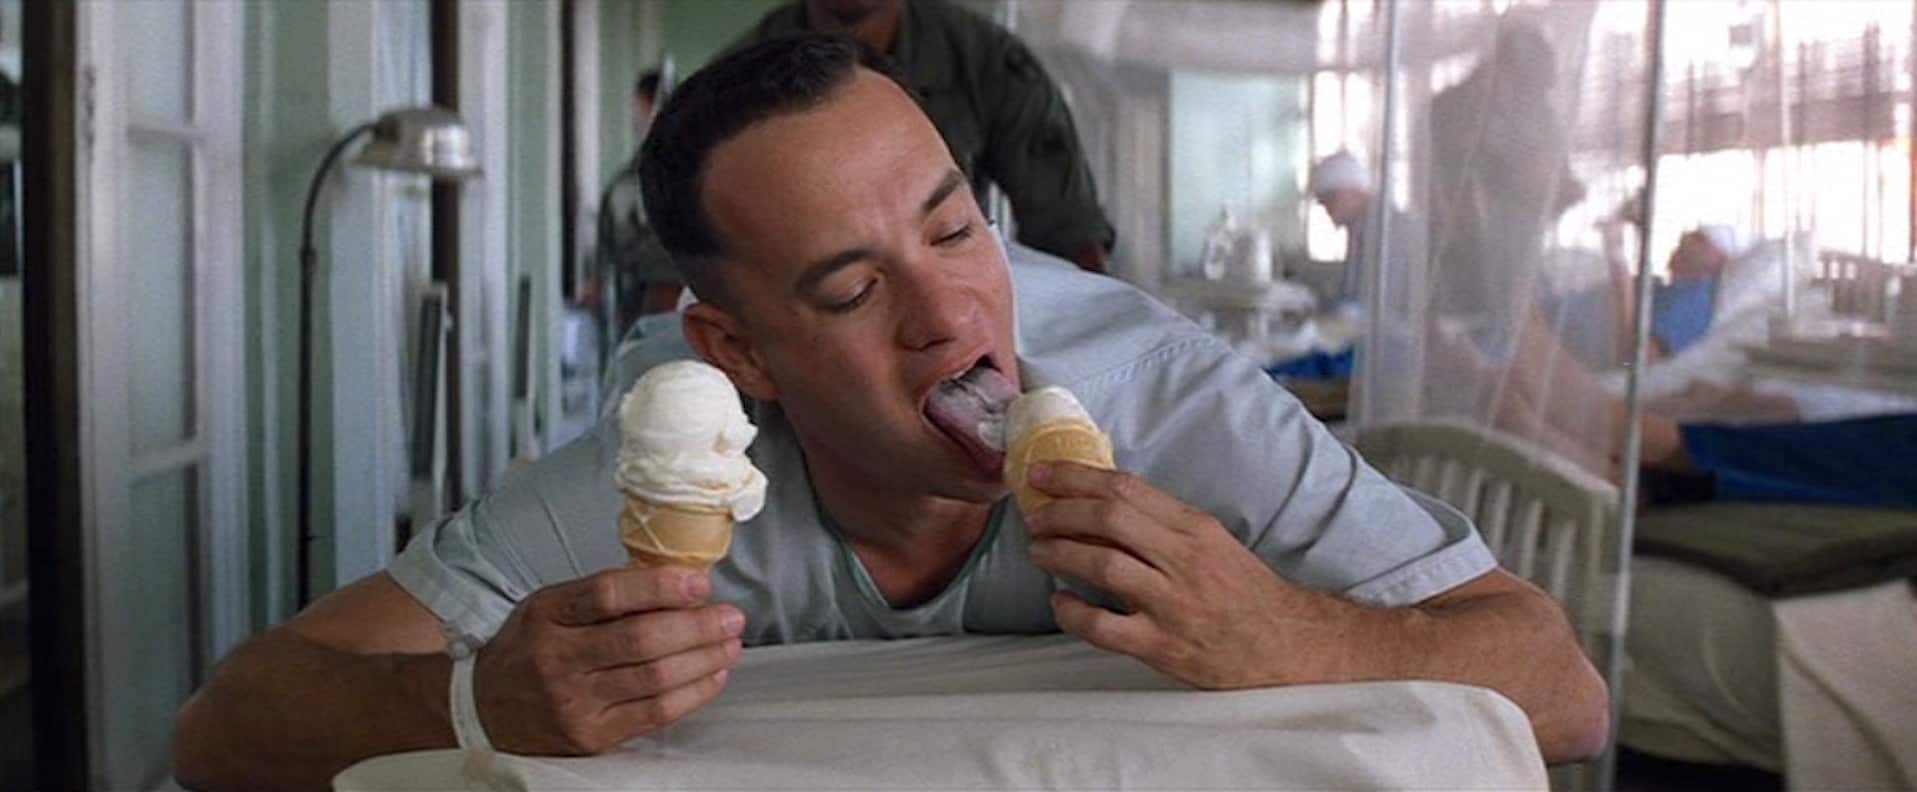 A man in the hospital eats two ice cream cones in this photo from Paramount Pictures.